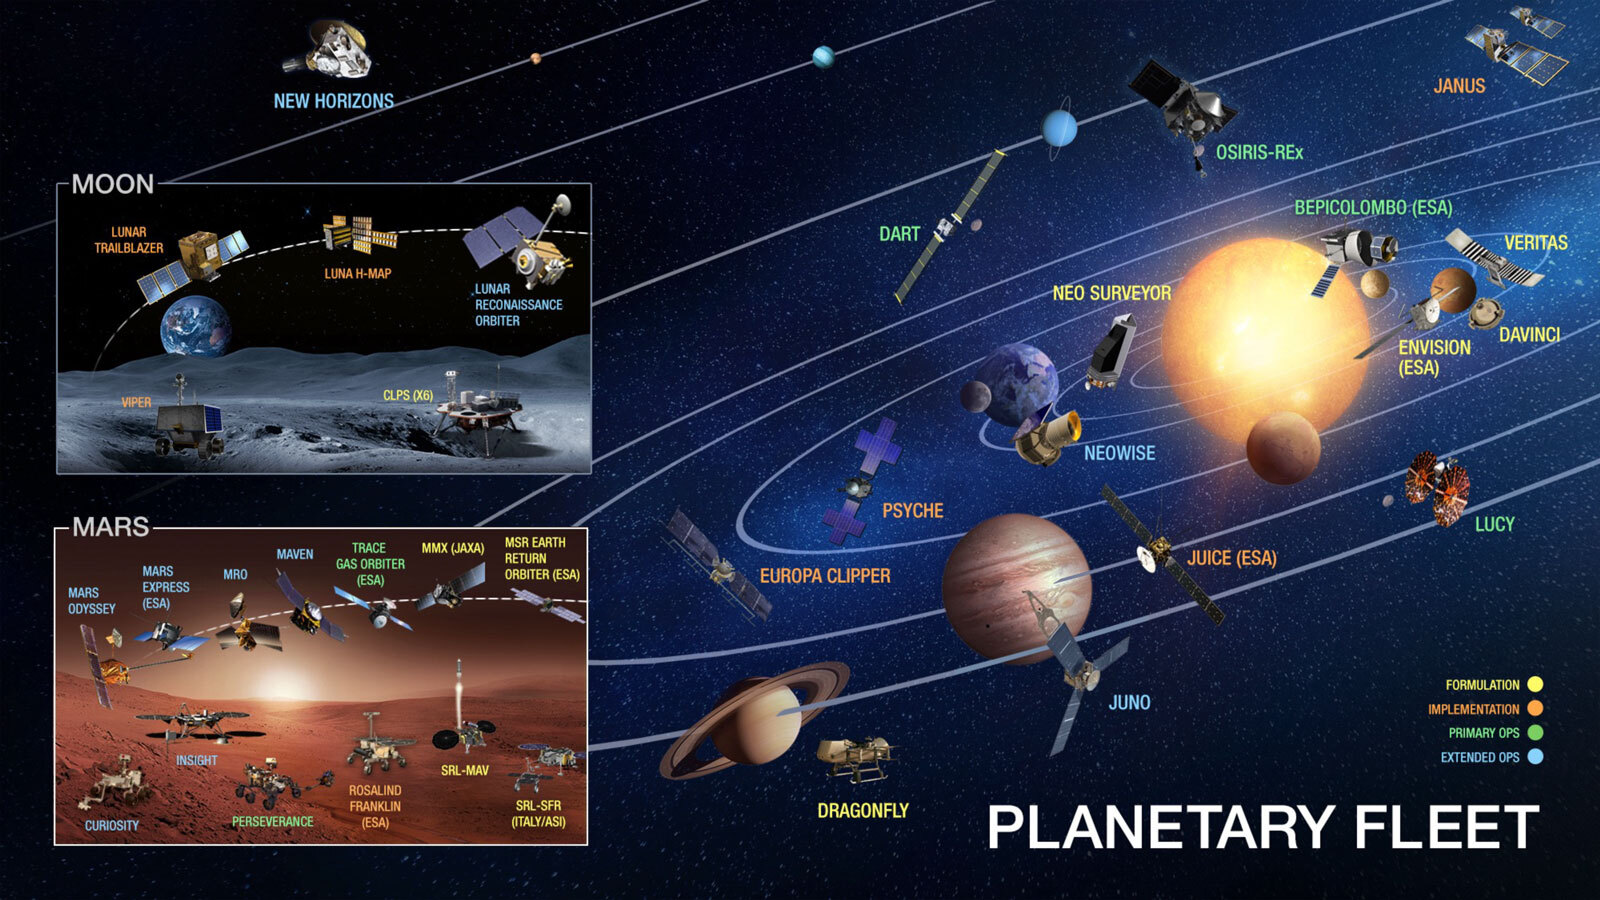 Graphic showing a variety of space missions across the solar system.